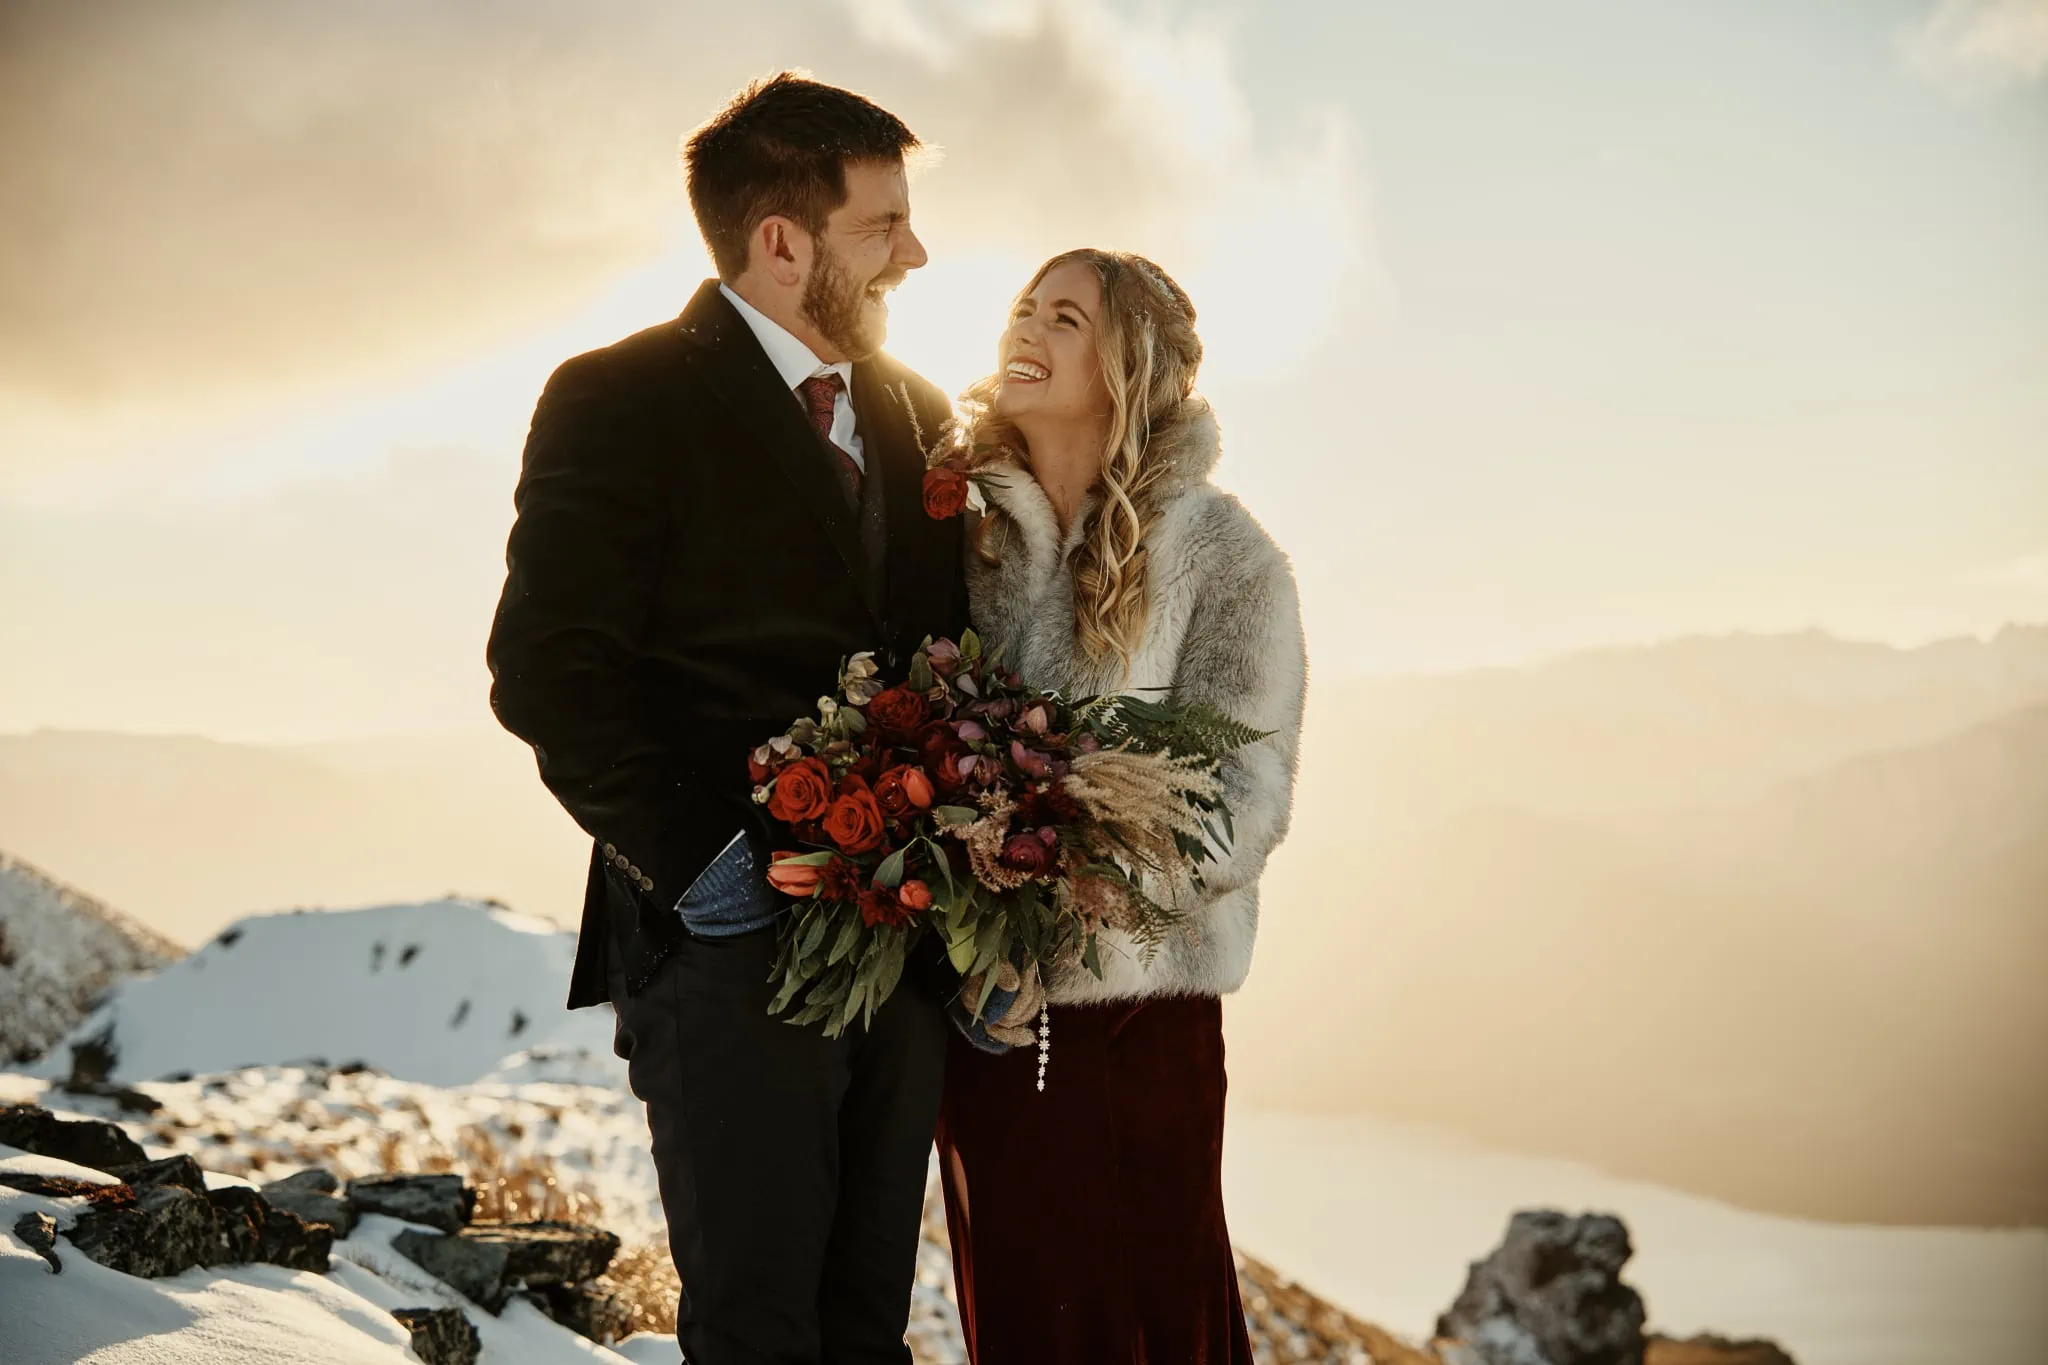 Claire and Rob's heli elopement wedding at Cecil Peak, with the bride and groom standing on top of a snowy mountain.